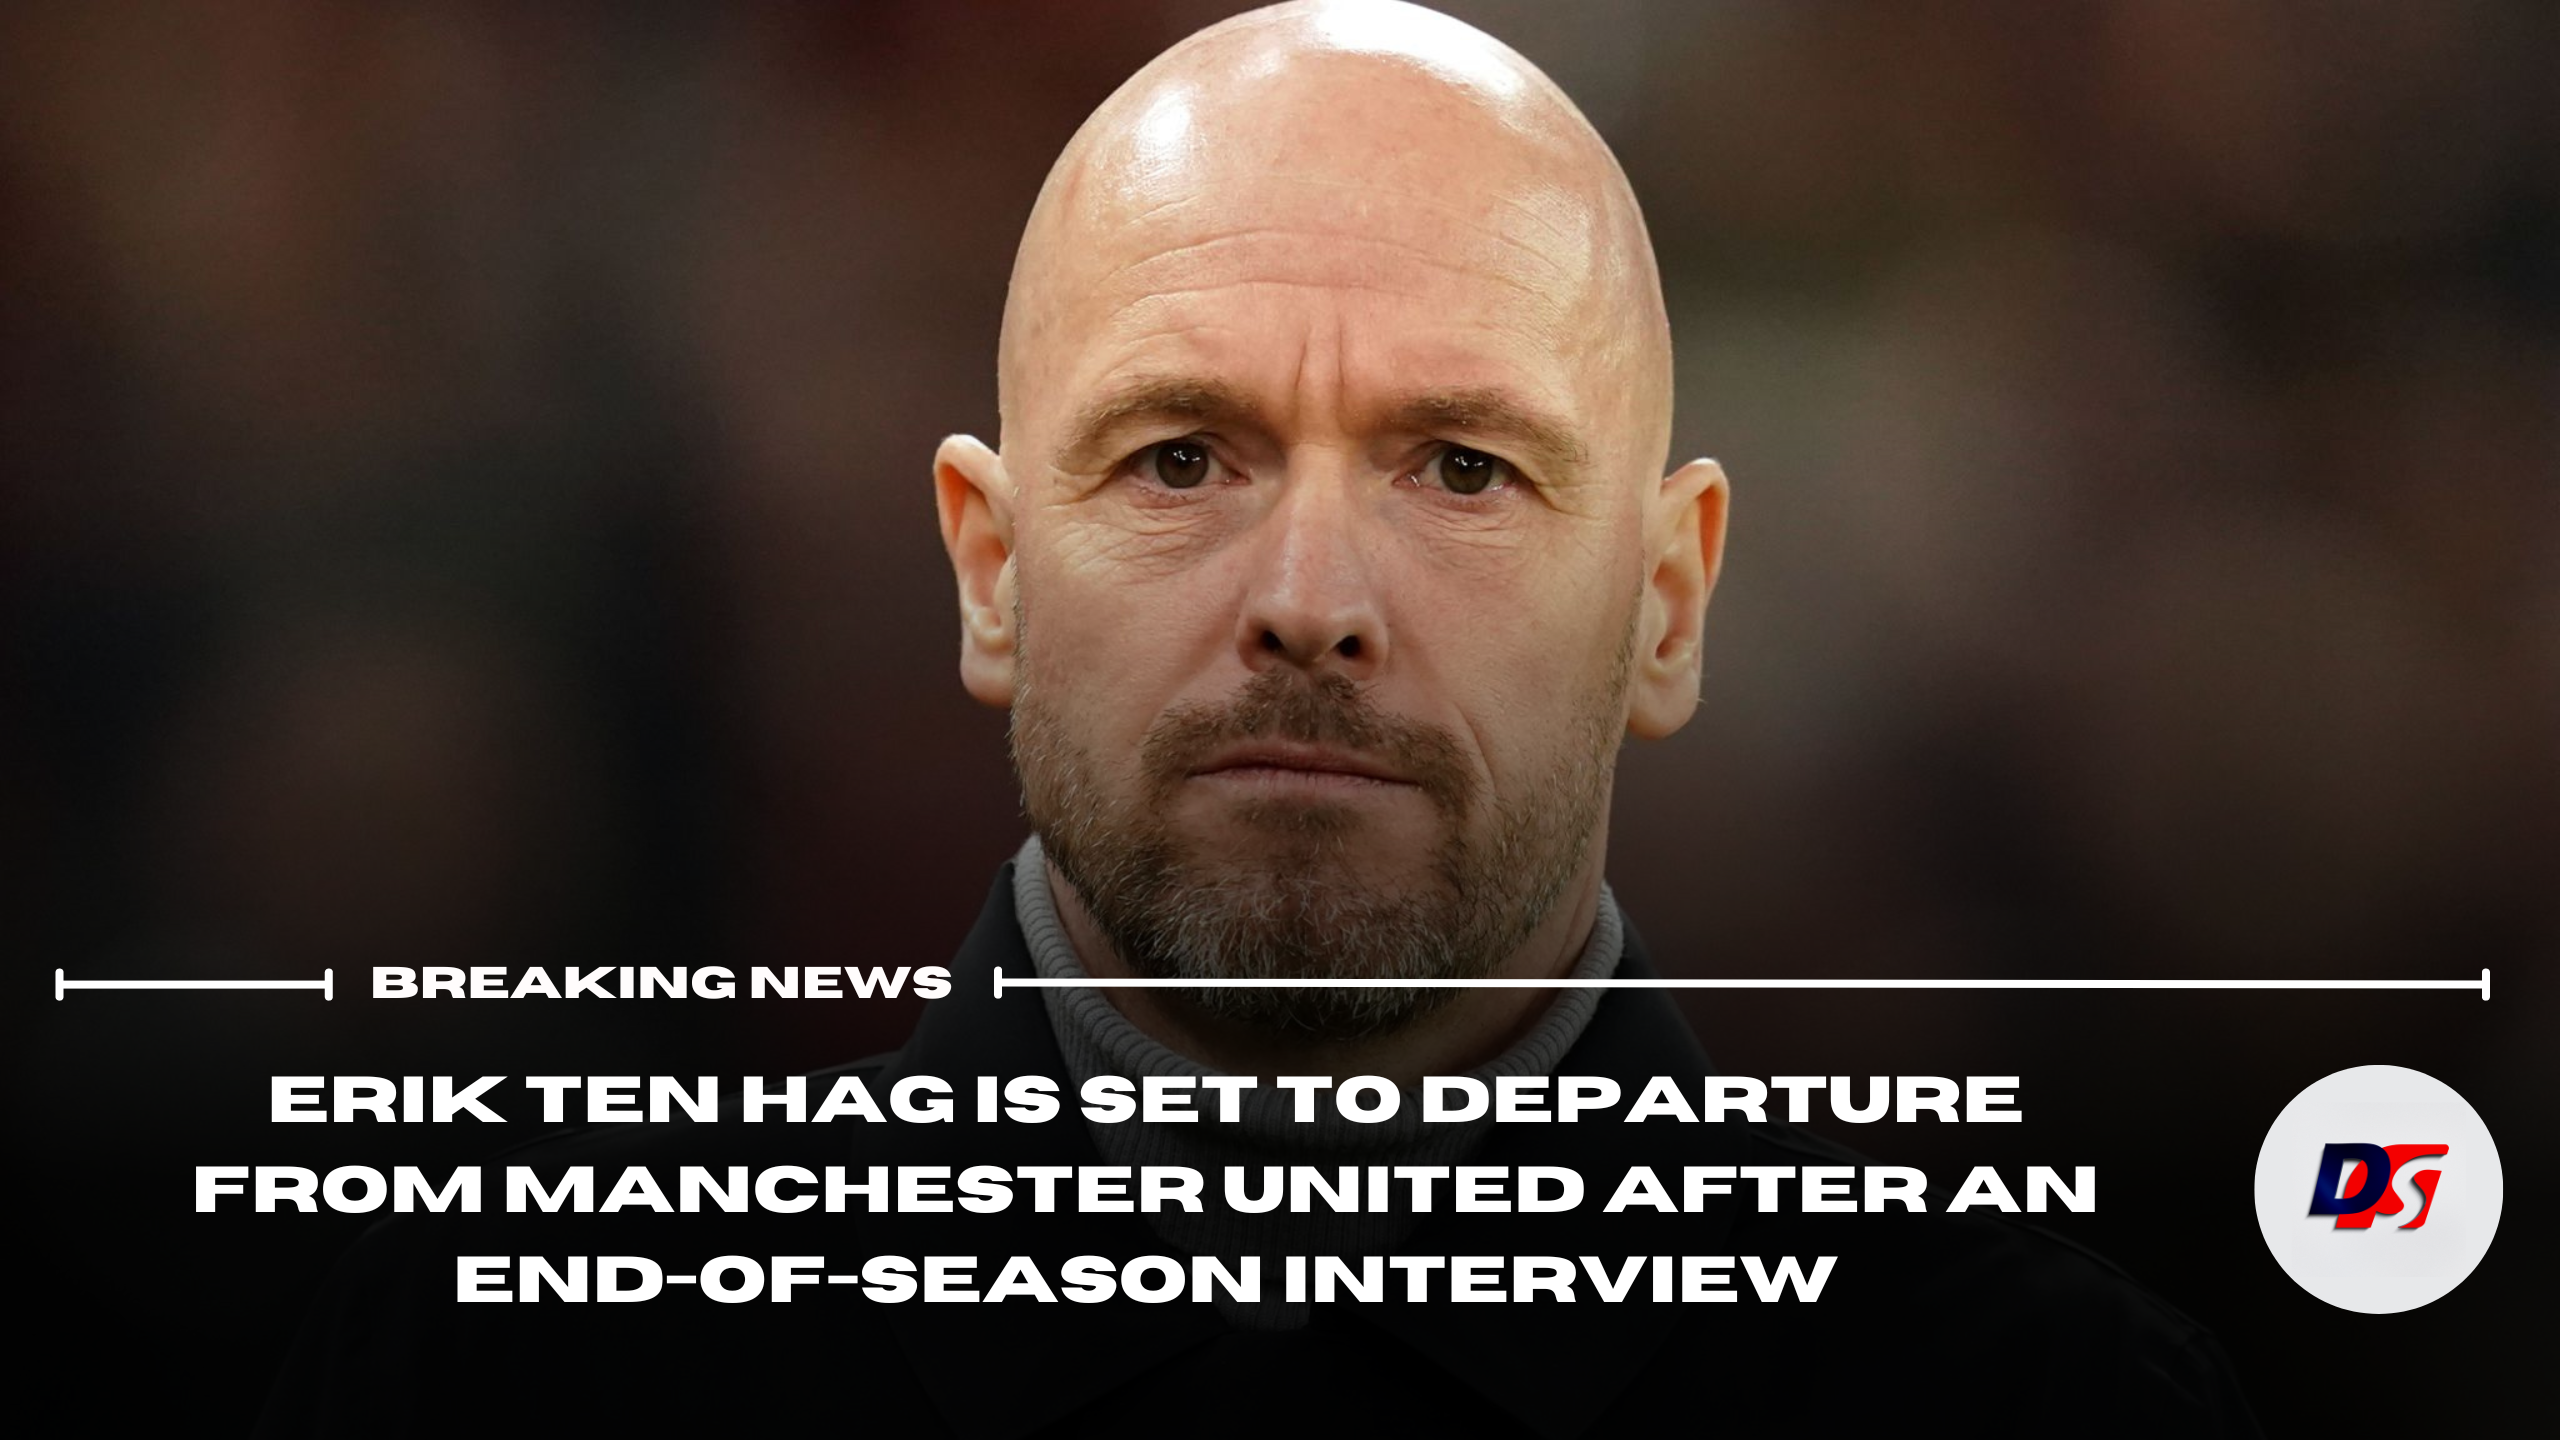 Erik Ten Hag is set to departure from Manchester United after an end-of-season interview